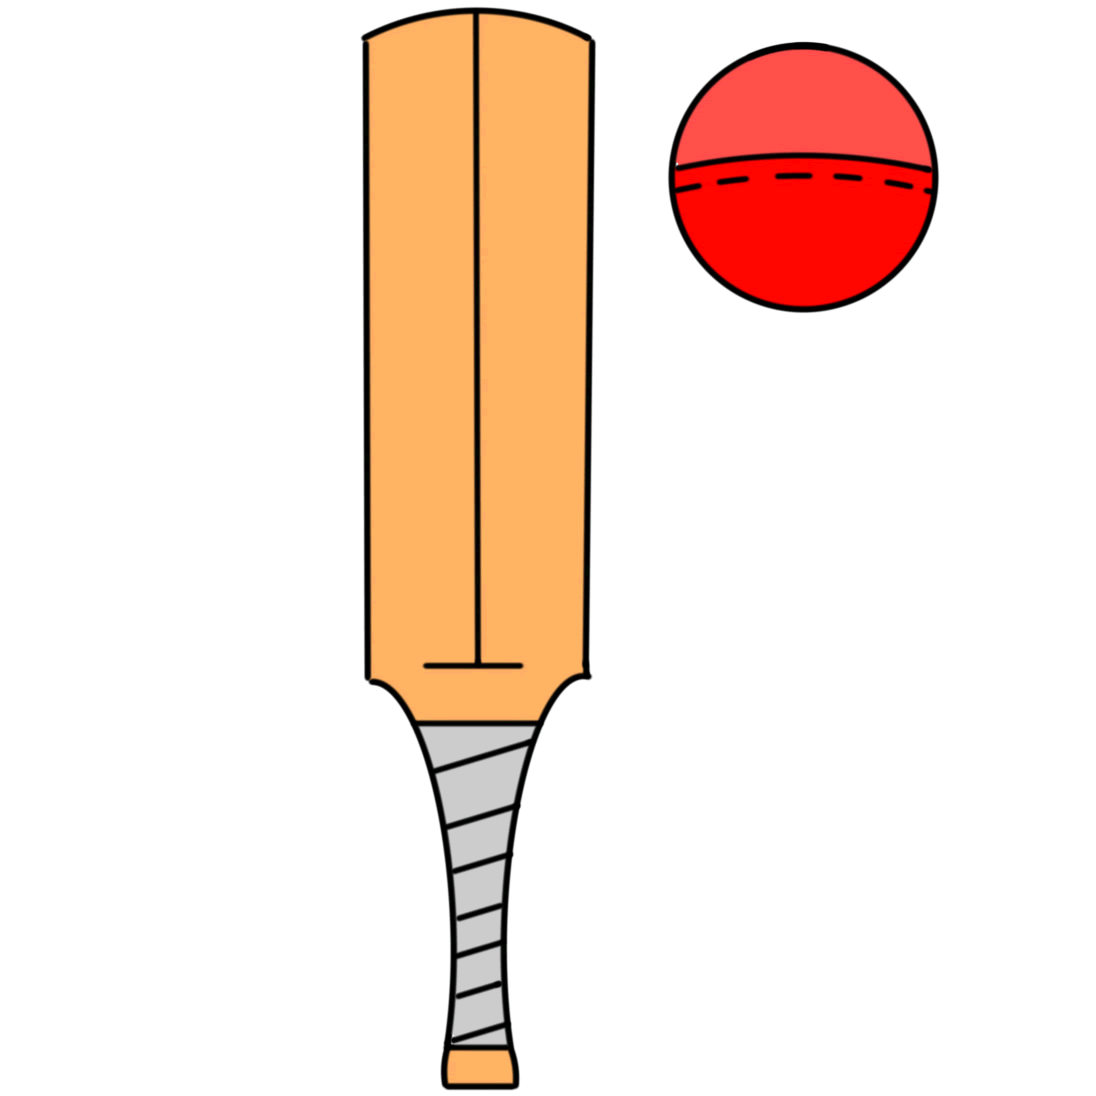 How to Draw a Cricket Bat and Ball Step by Step